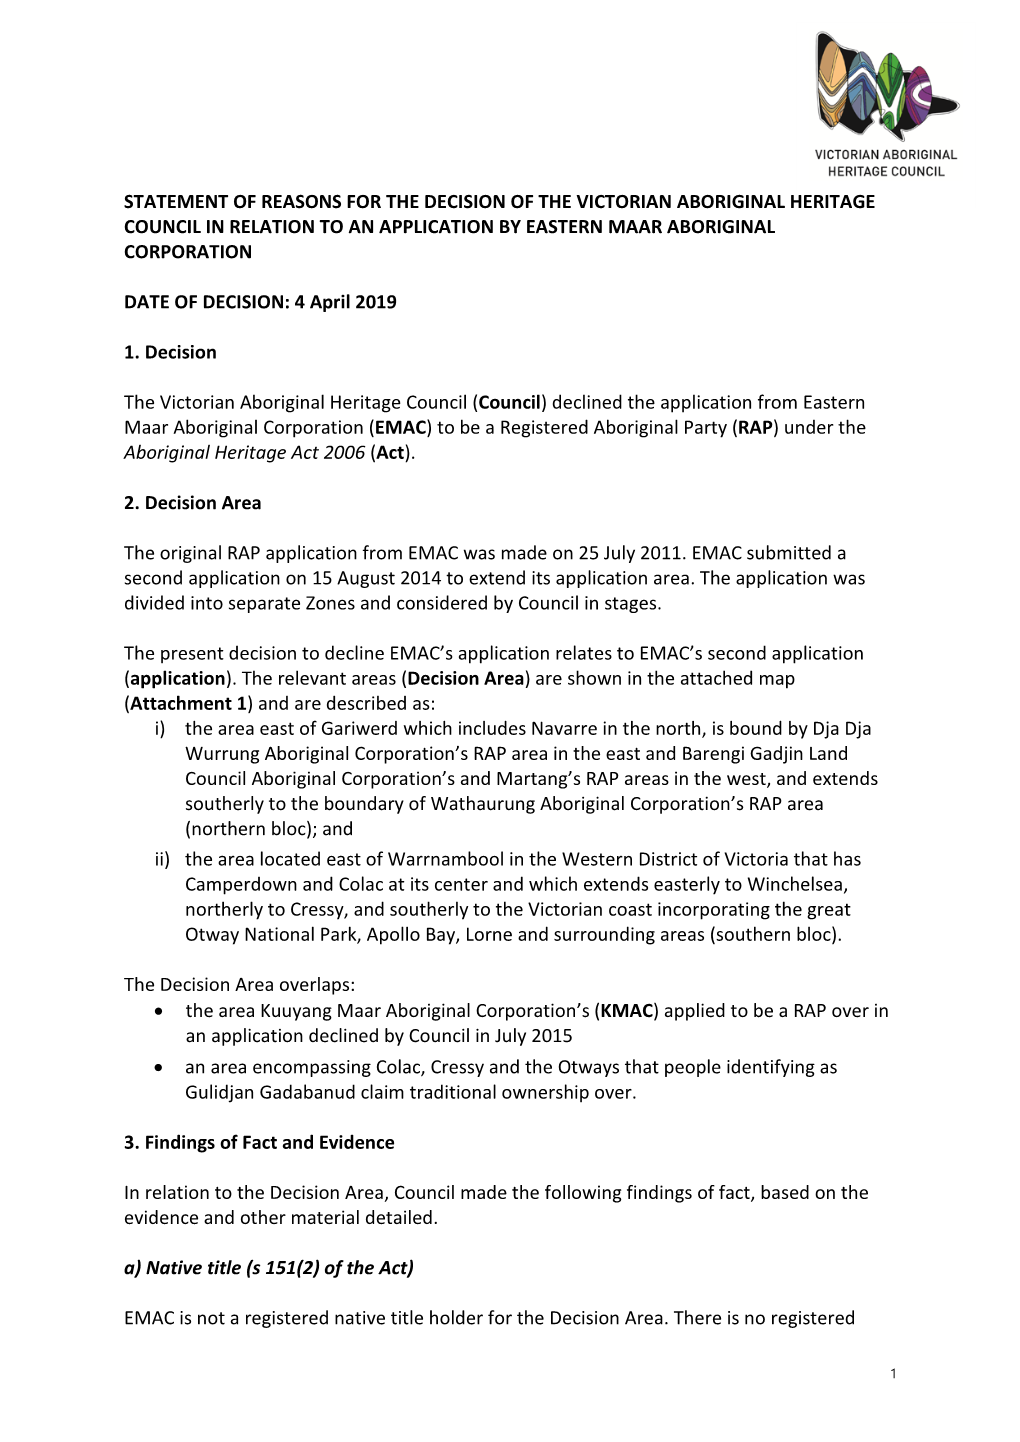 Statement of Reasons for the Decision of the Victorian Aboriginal Heritage Council in Relation to an Application by Eastern Maar Aboriginal Corporation